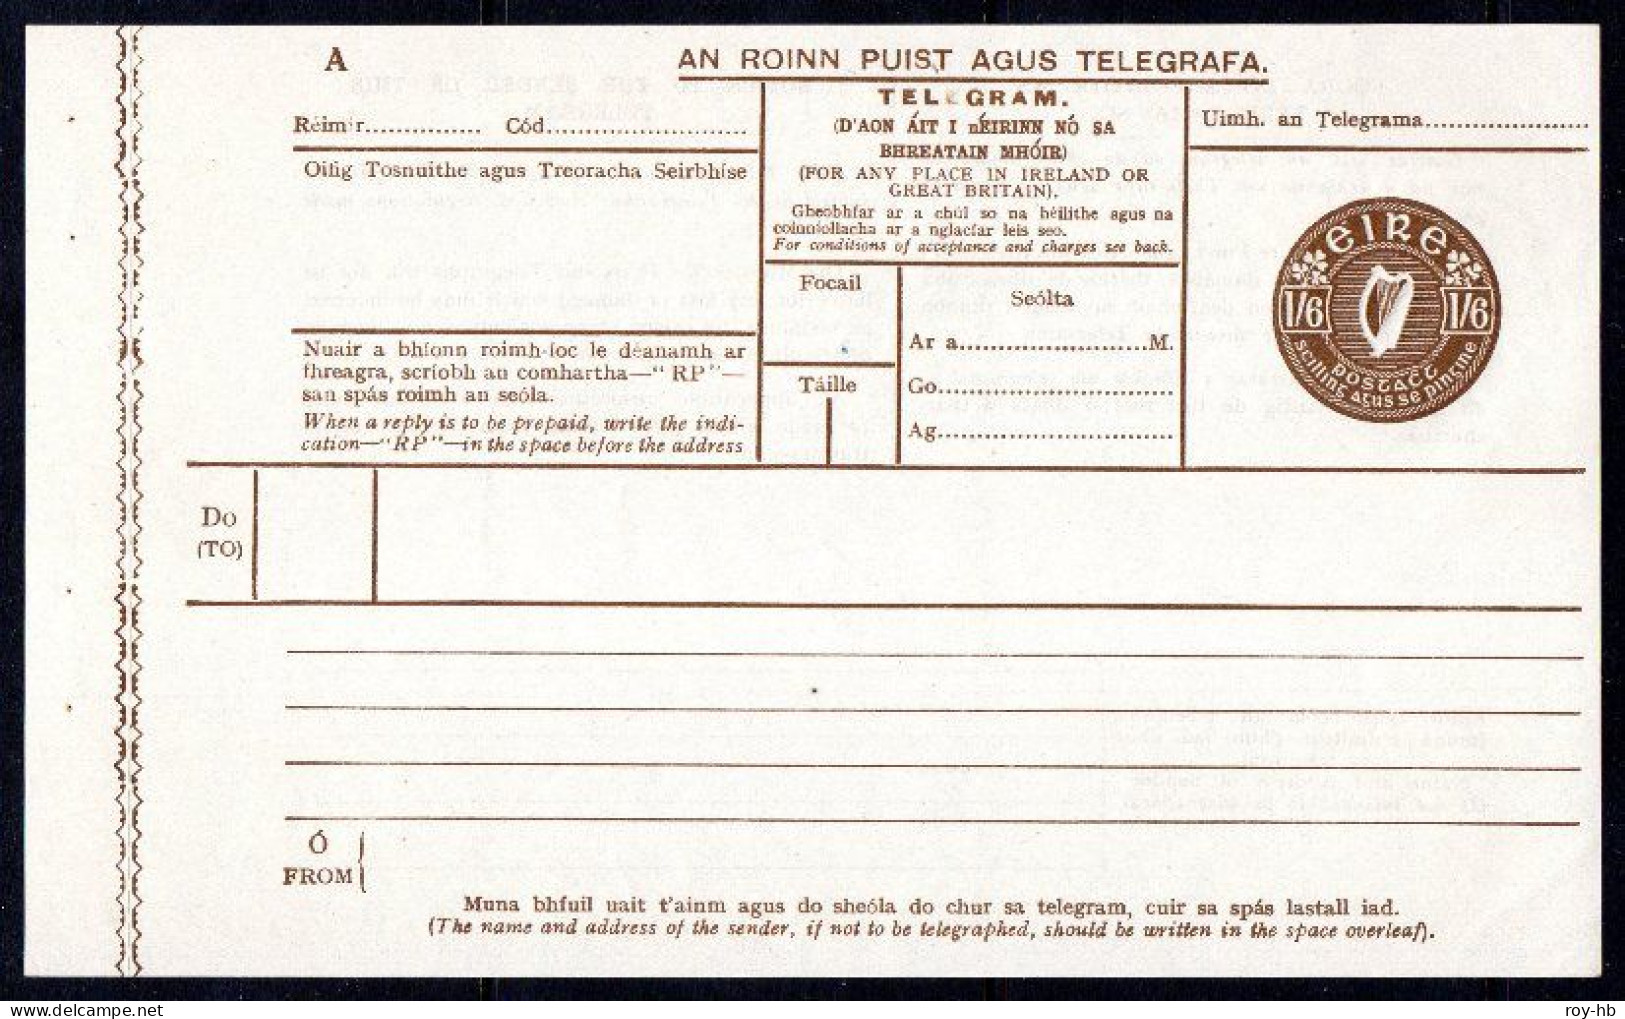 Telegram Form, 1929 1/6 "all Brown" With Original Interleaving Showing A Clear Albino Impression Of The Indicia. - Enteros Postales